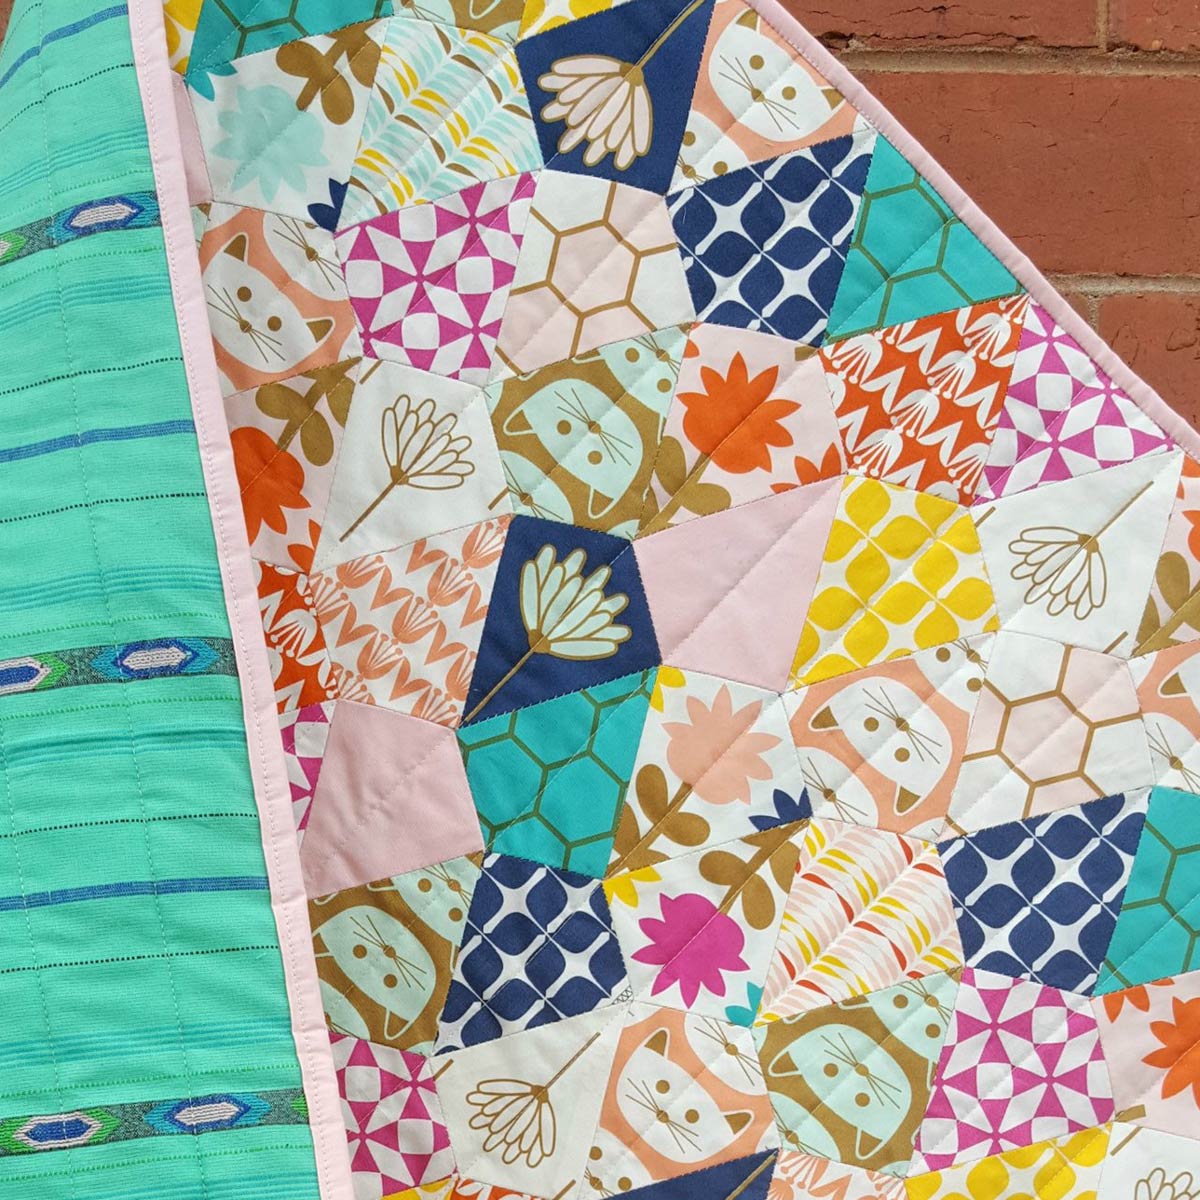 Pond Quilt from Tales of Cloth | English paper piecing | Blush fabric collection by Dana Willard from Art Gallery Fabrics